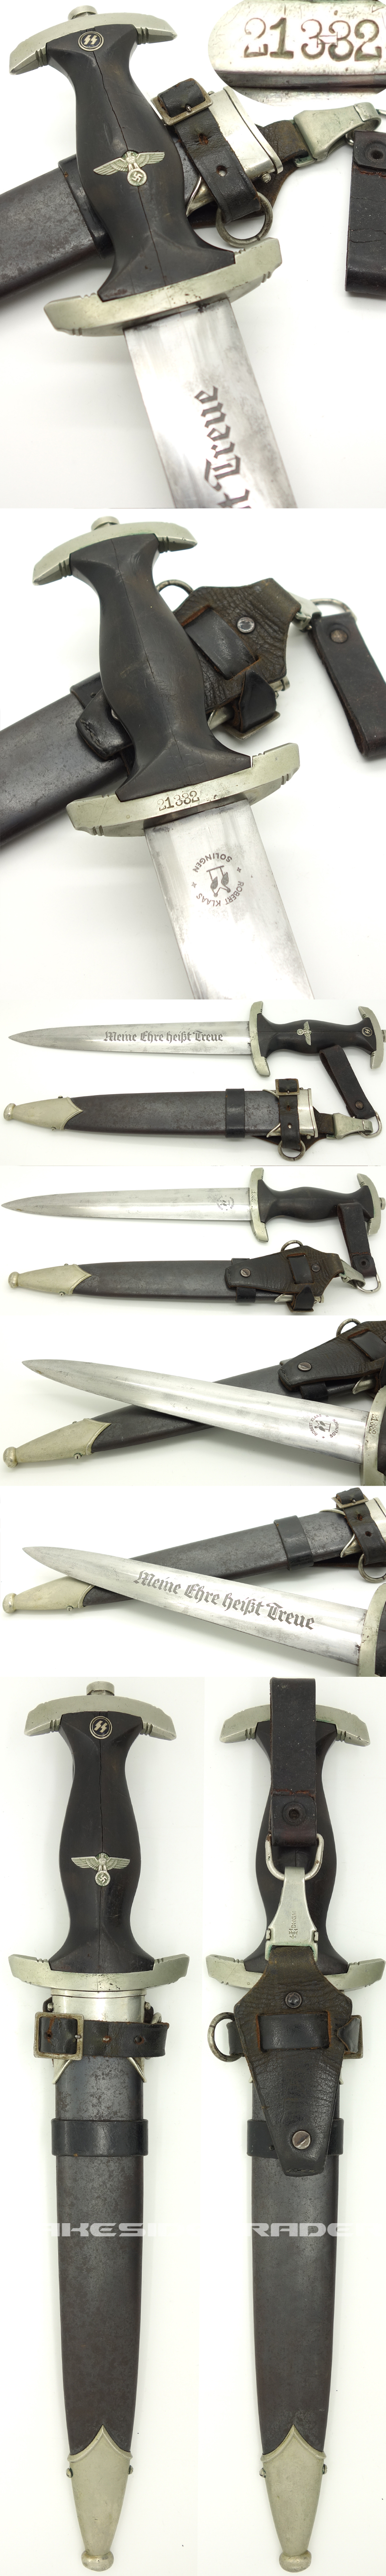 Rottenfuher Heinrich Frank - Early SS Dagger by Klaas